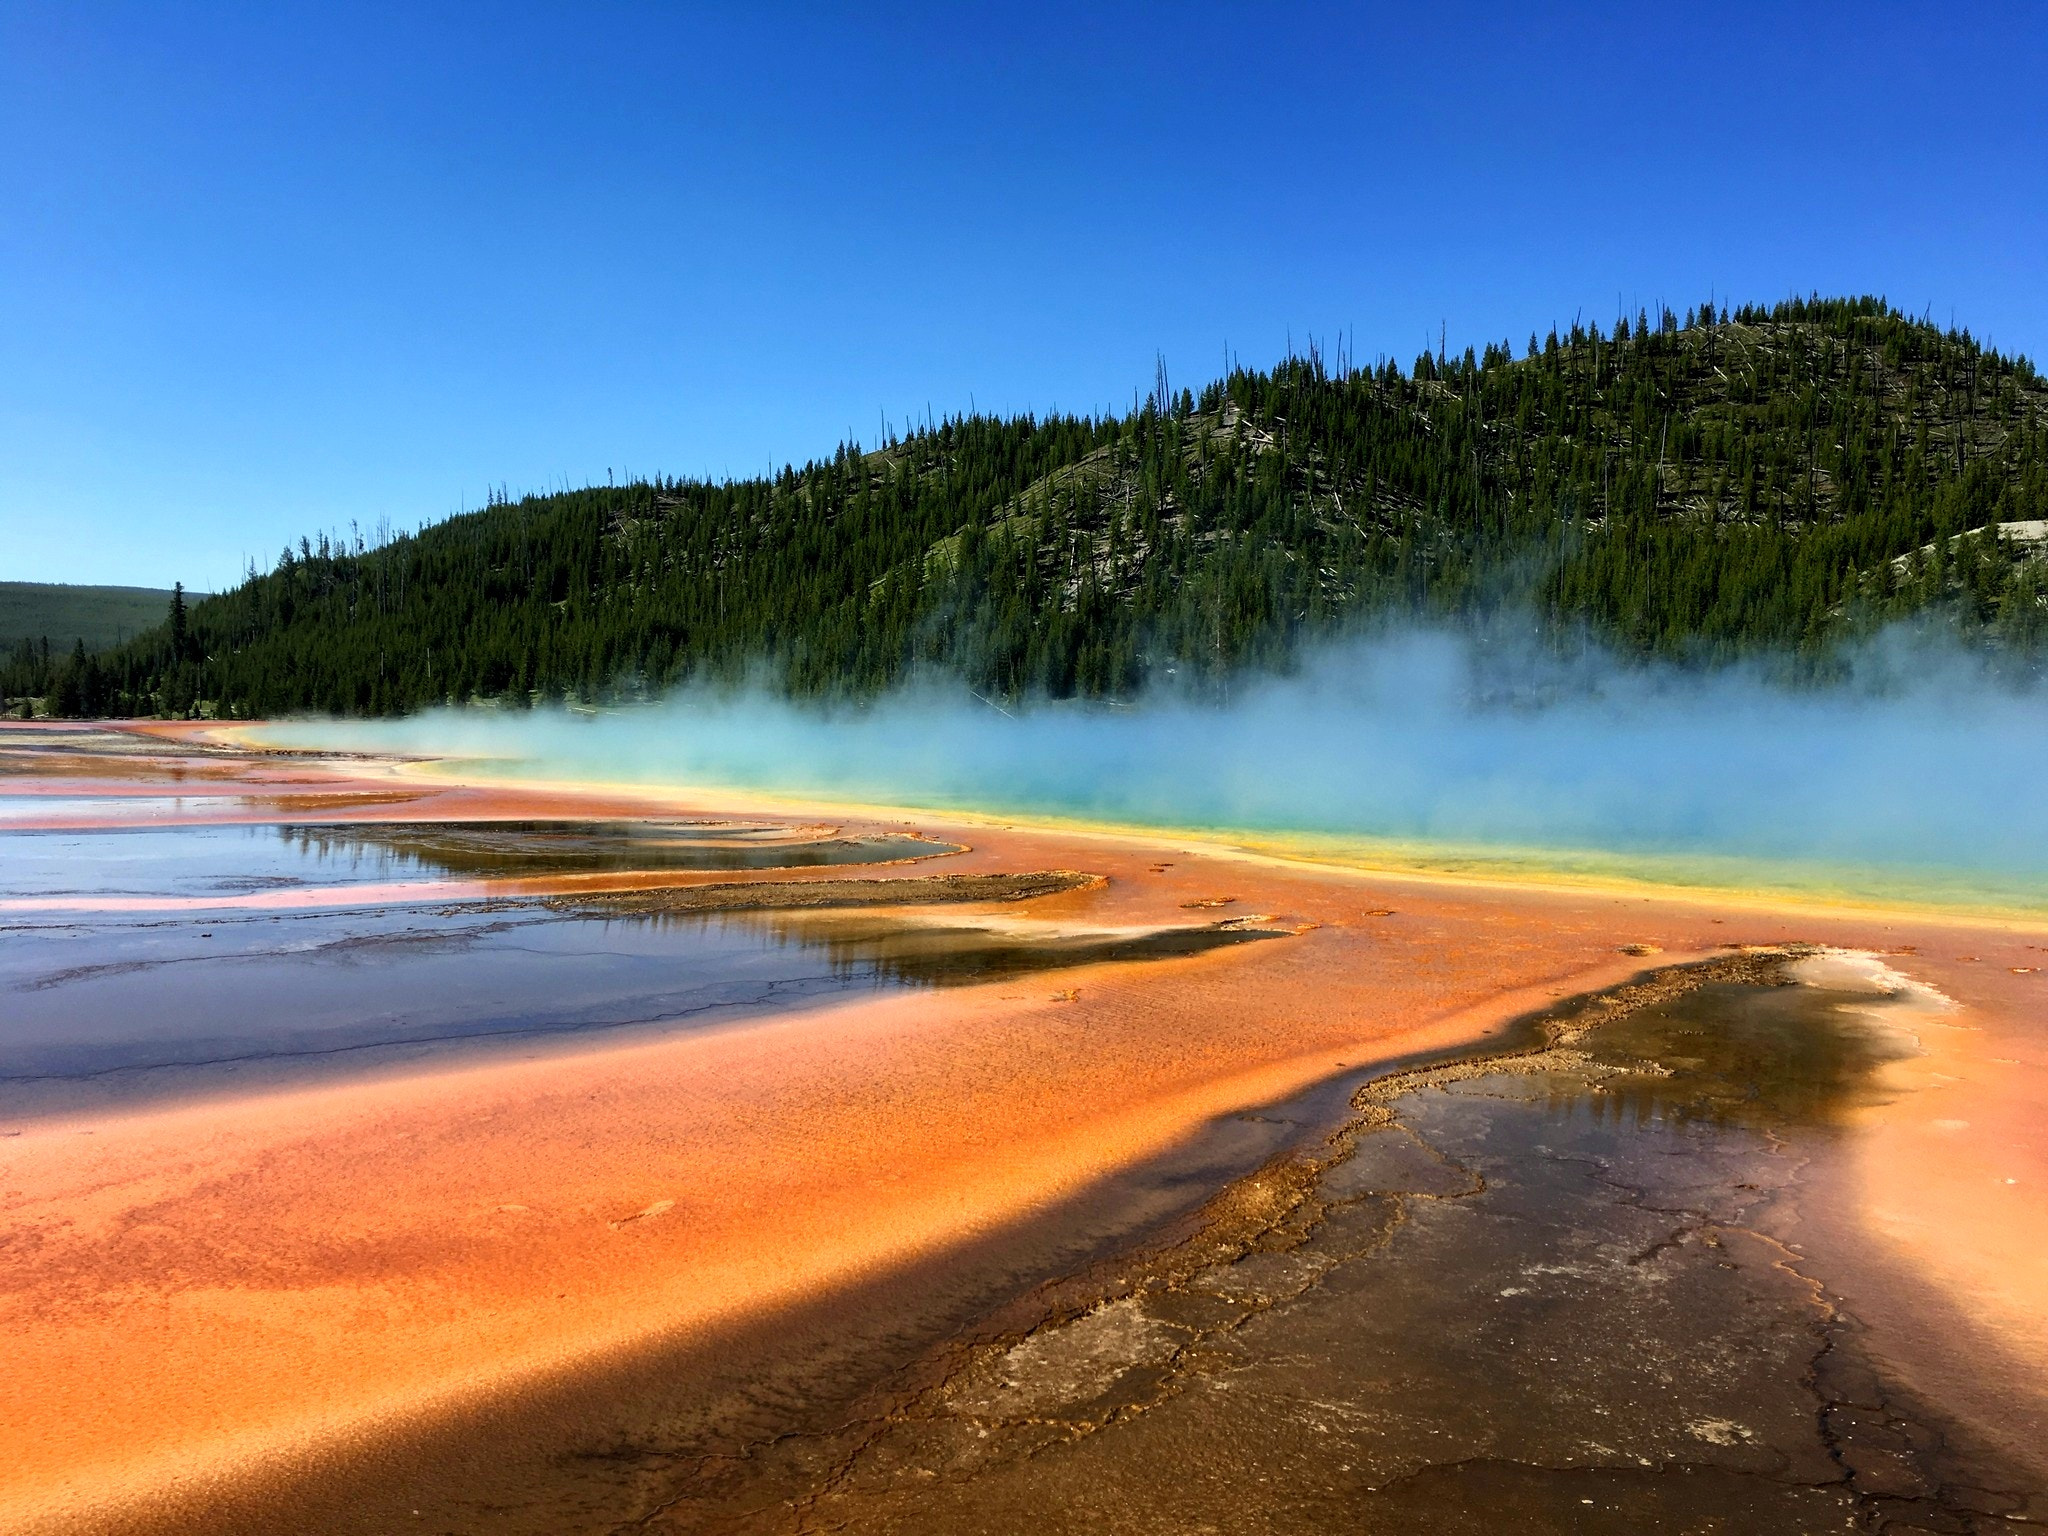 Jag.gr 645 PRO Mk III for Apple iPhone 6s sample photo. Grand prismatic spring photography